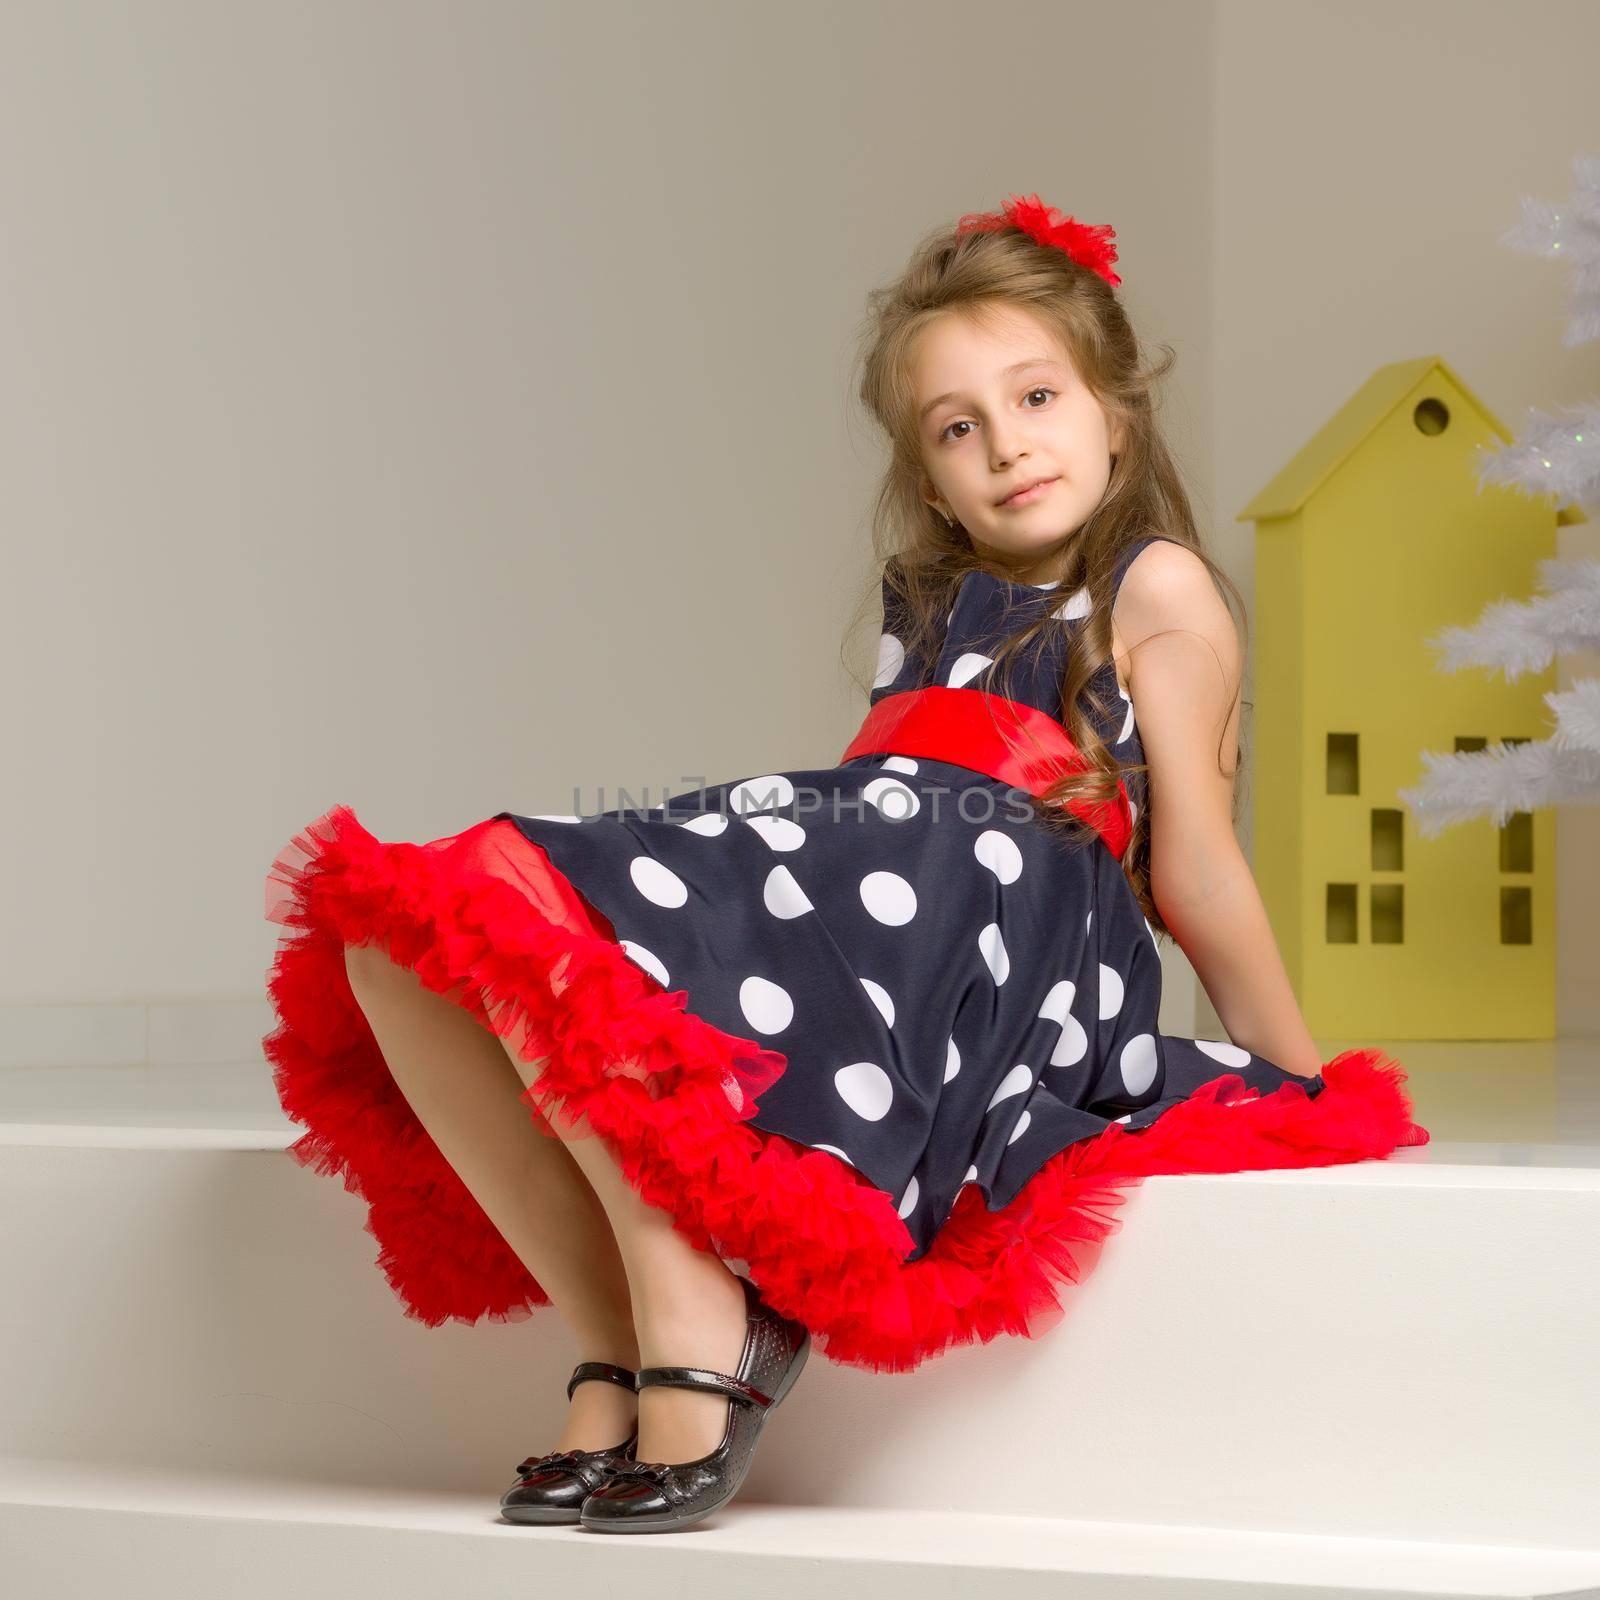 Portrait of Beautiful Girl Wearing Blue Polka Dot Dress, Red Bow and Black Shoes Sitting on White Stairs and Looking at Camera, Charming Coquettish Girl Posing in Retro Fashion Clothes in Studio